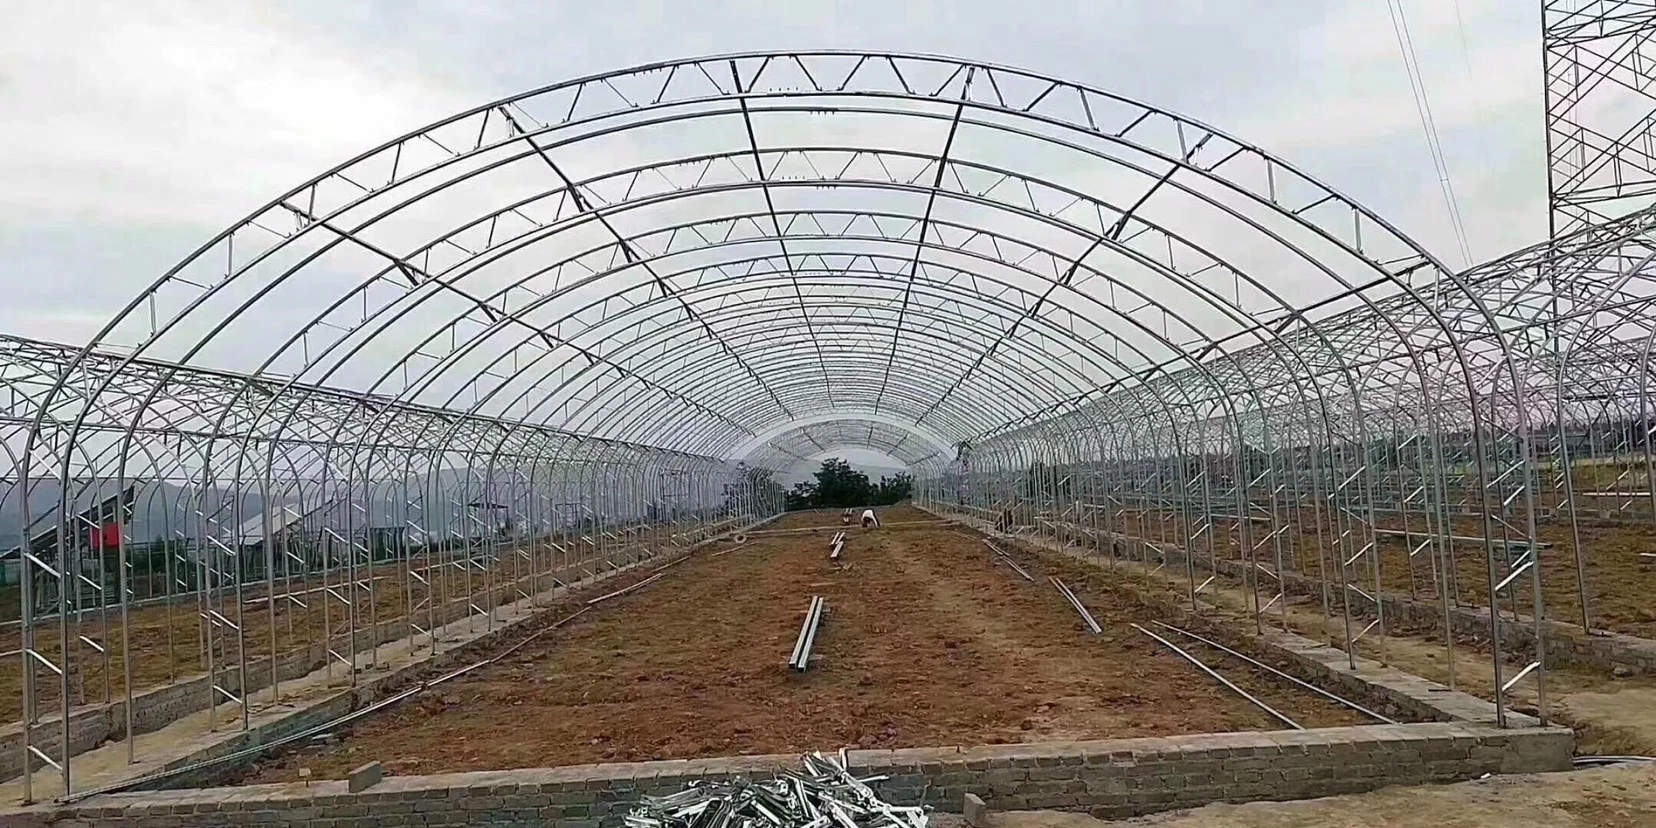 Modern Agriculture Customized Oval Tube Greenhouse with Hydroponics System Irrigation System for Vegetables Fruits Flowers Tomato Tomato